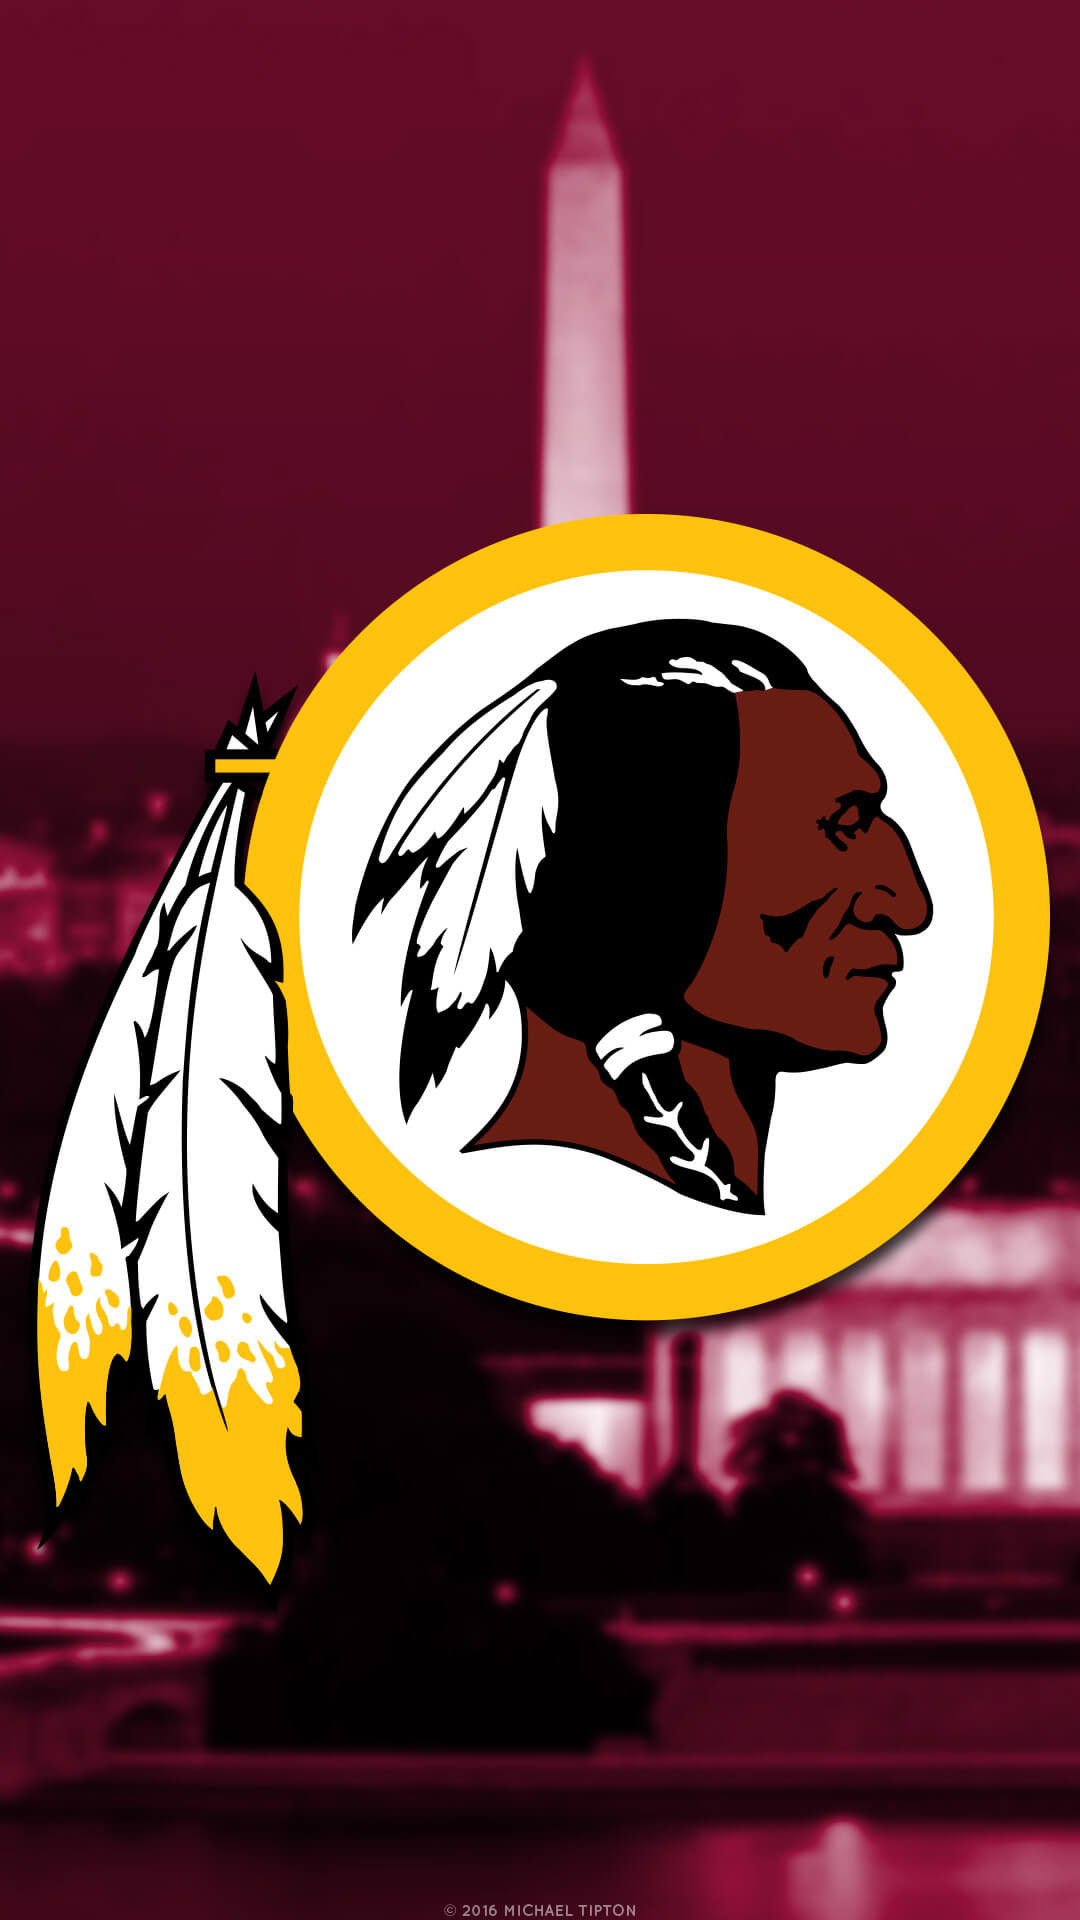 1080x1920 Washington Redskins Live Wallpaper for Android, iPhone